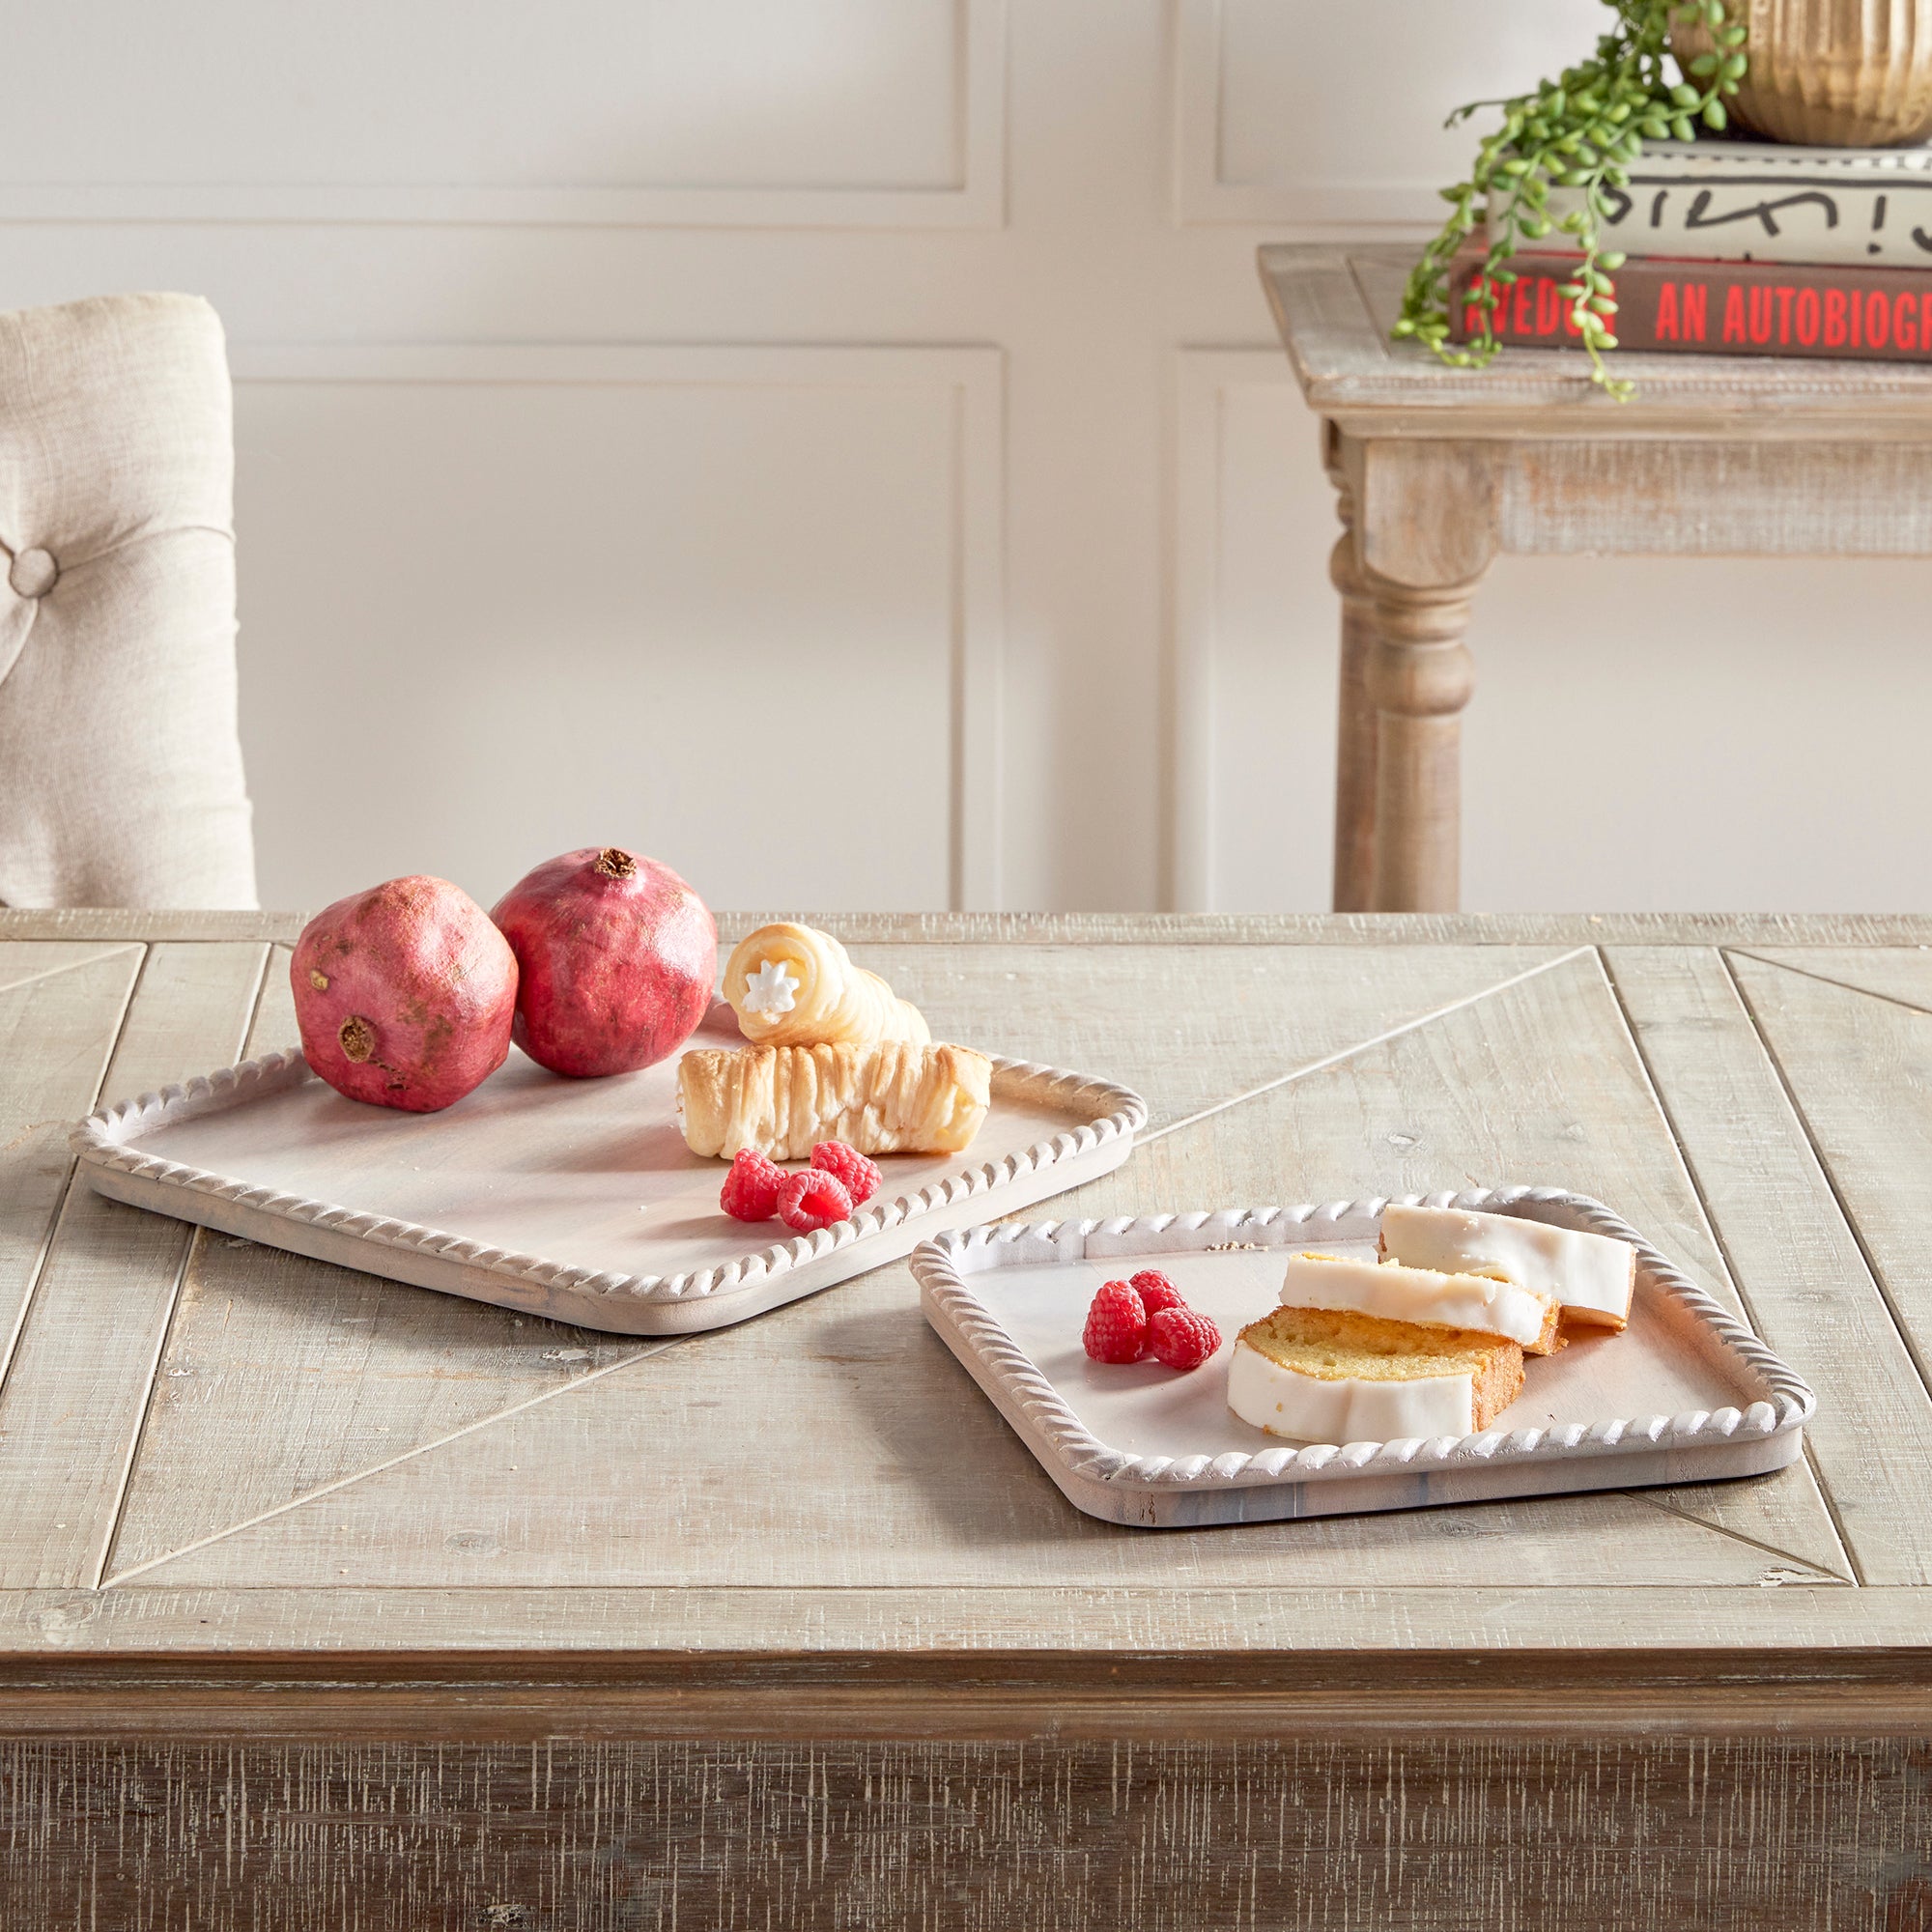 Hand carved from mango wood, this pair of trays is a sweet little accent for baked goods or a cheese tray. A little touch of natural wood tone is always on trend. Amethyst Home provides interior design, new construction, custom furniture, and area rugs in the Alpharetta metro area.